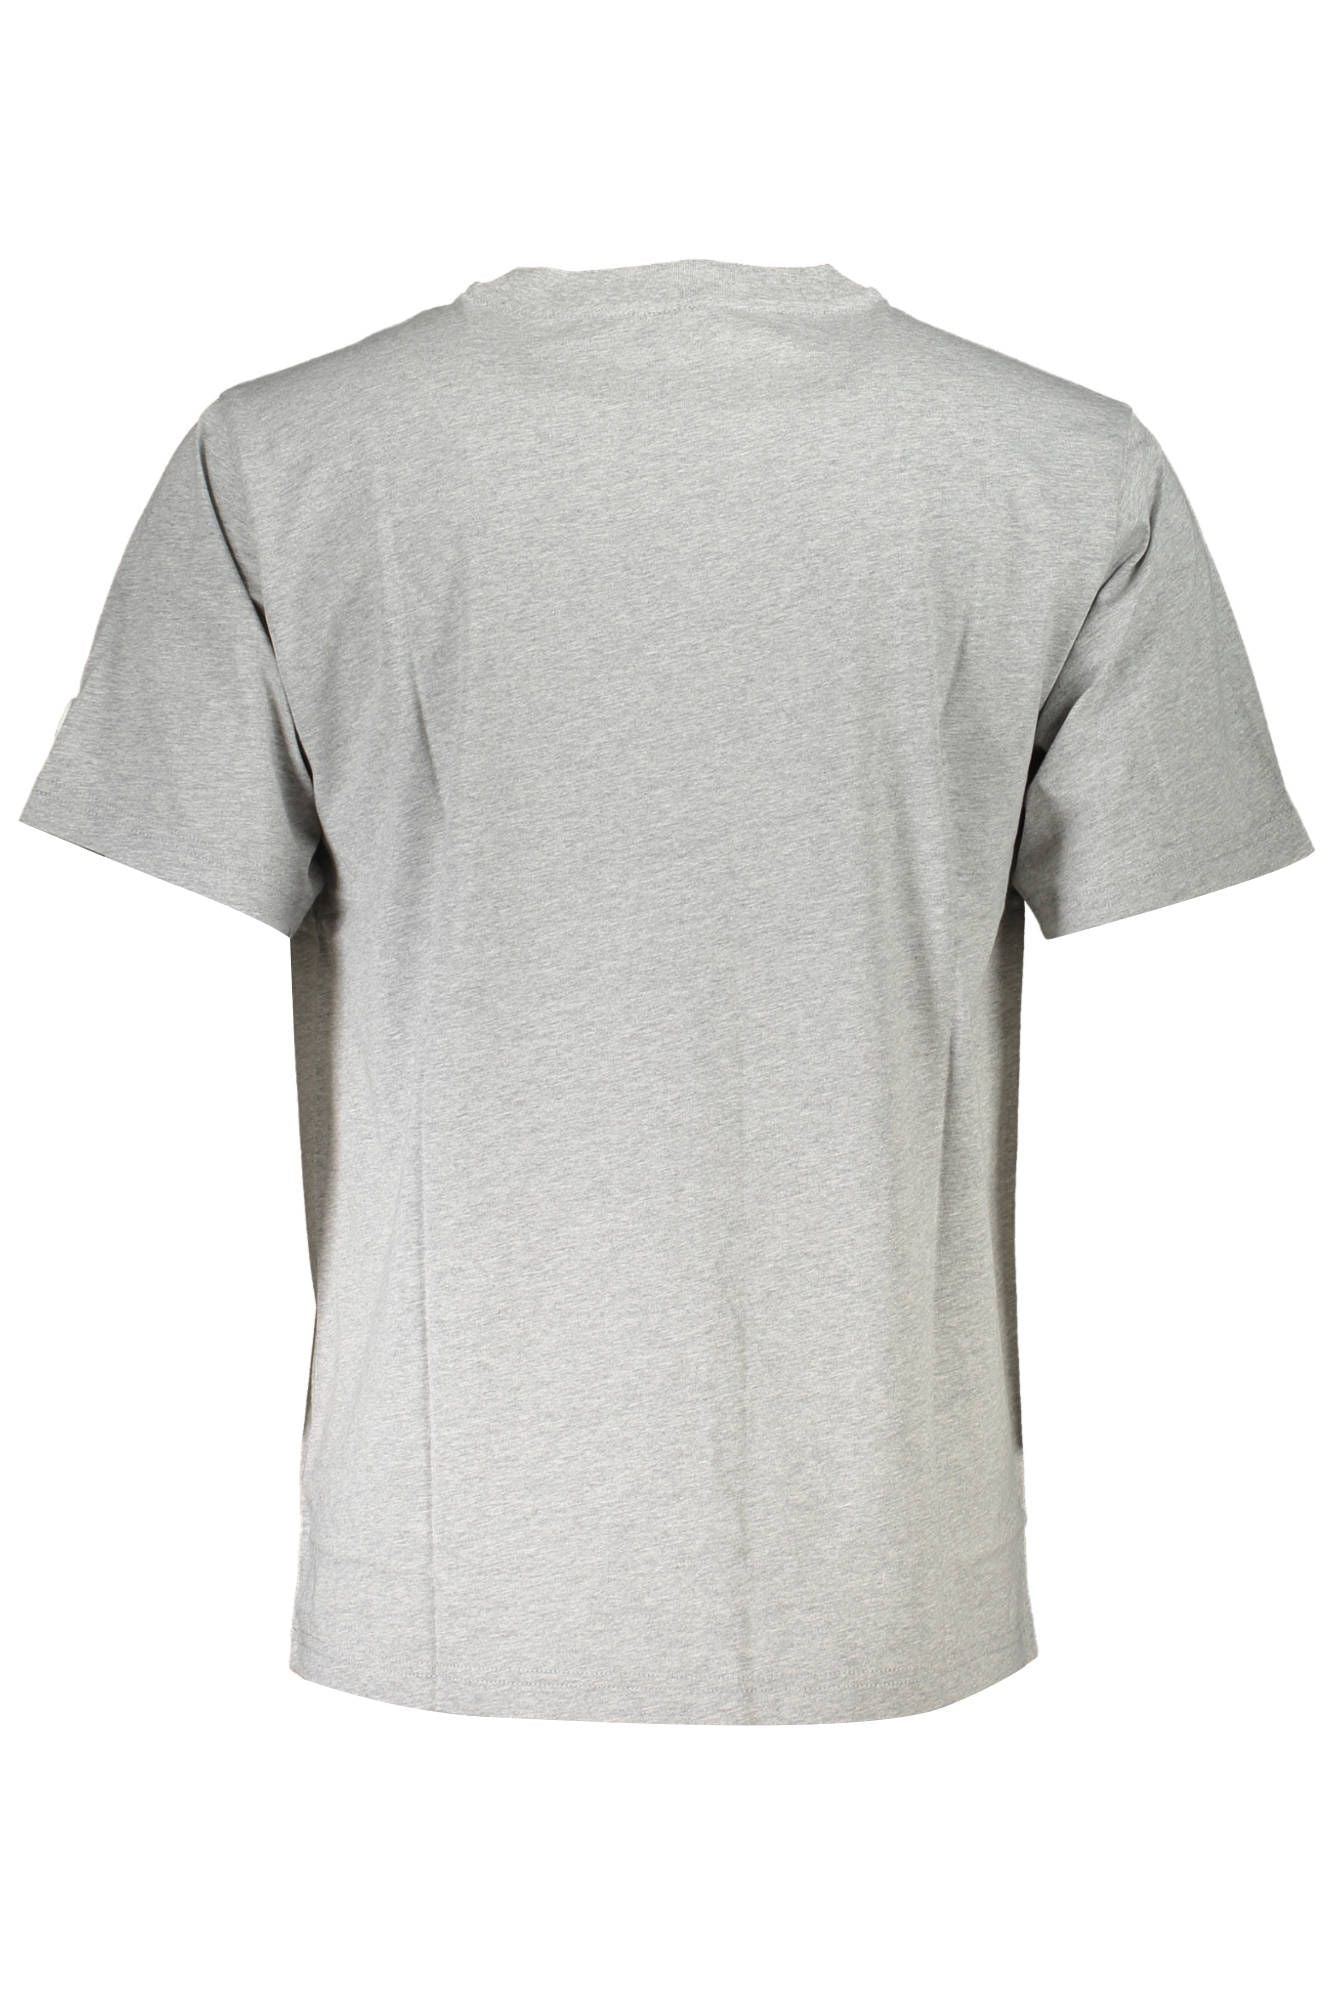 North Sails Eco-Friendly Gray Comfort Fit Tee